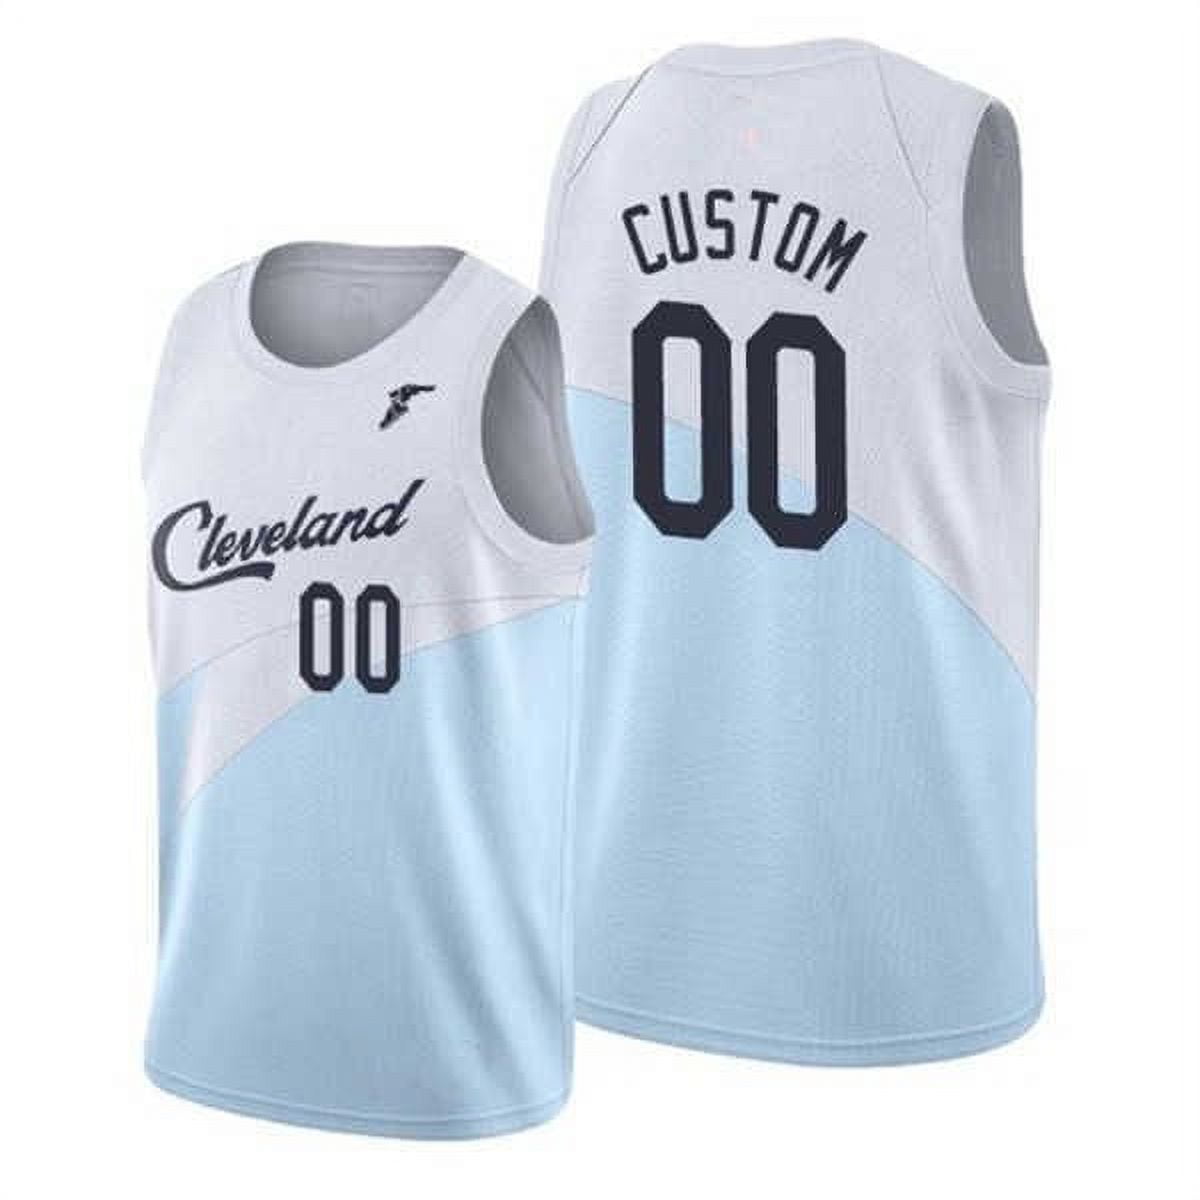 Shop Cleveland Cavaliers City Edition with great discounts and